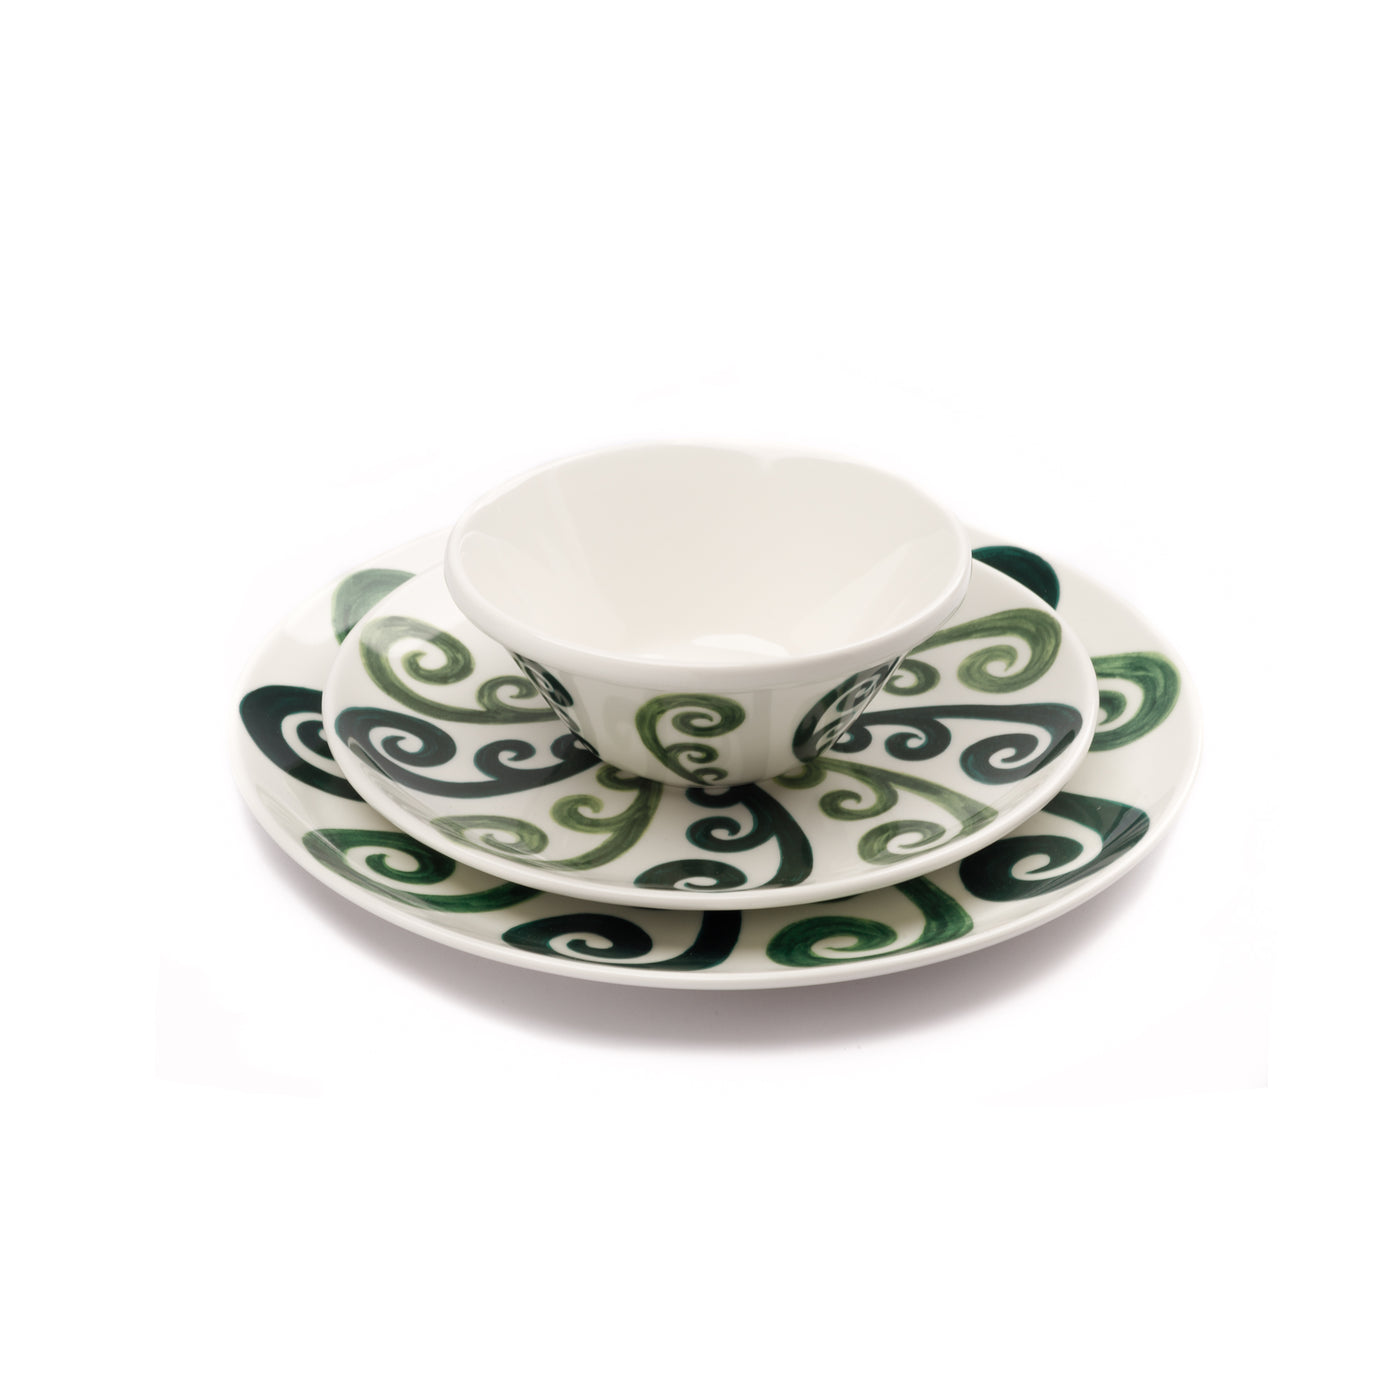 Peacock Dessert Plate in Two Tone Green